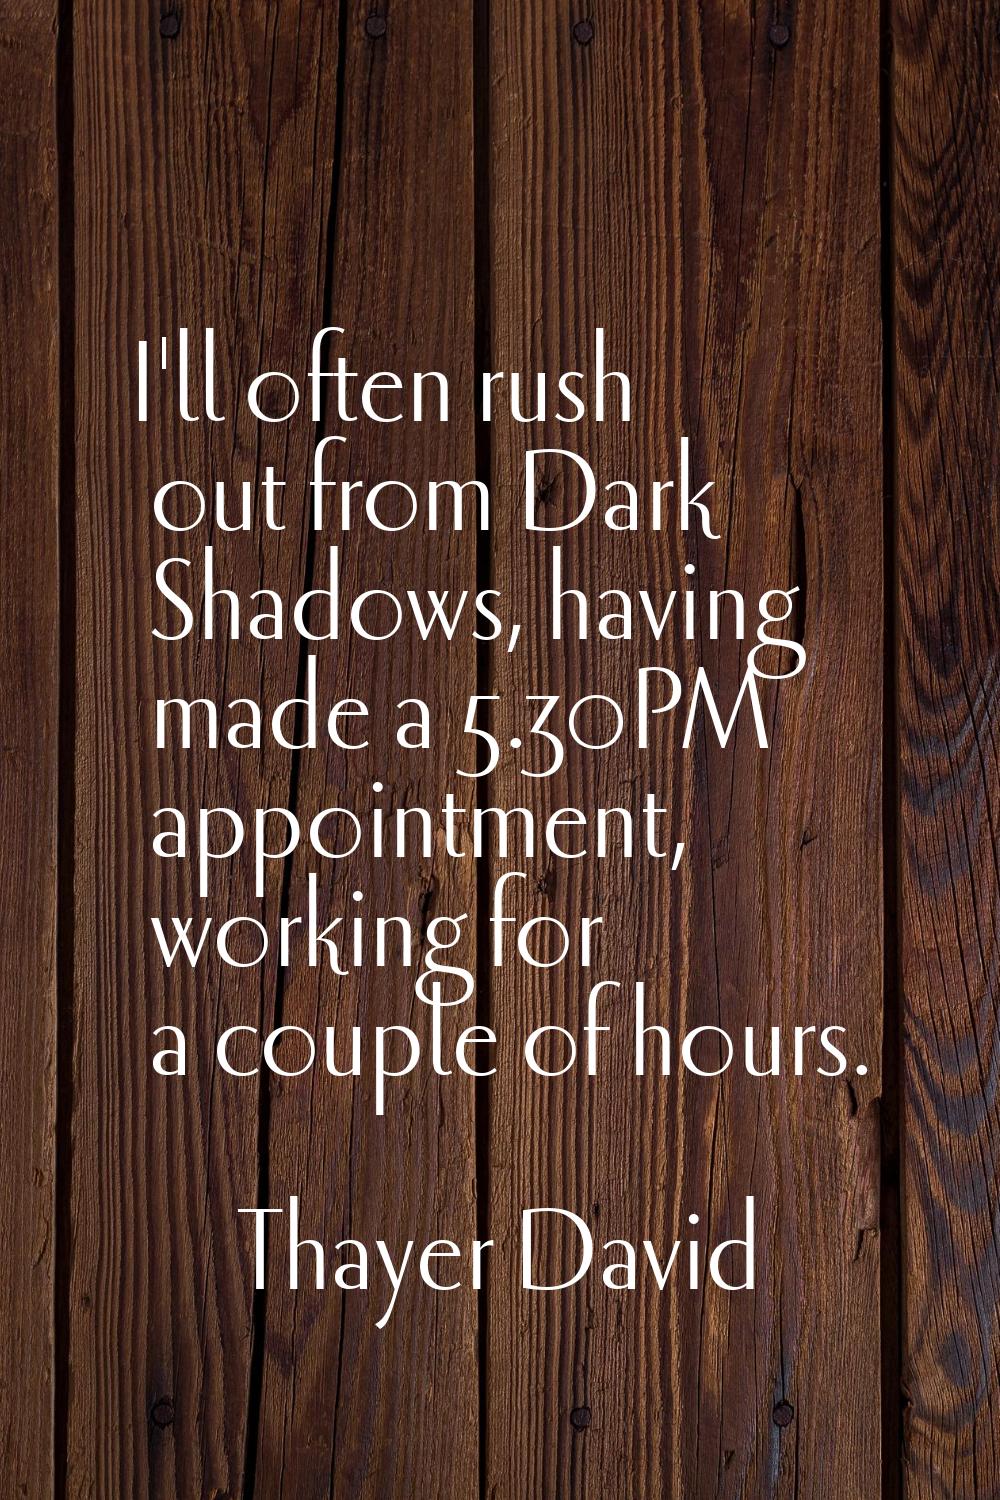 I'll often rush out from Dark Shadows, having made a 5.30PM appointment, working for a couple of ho